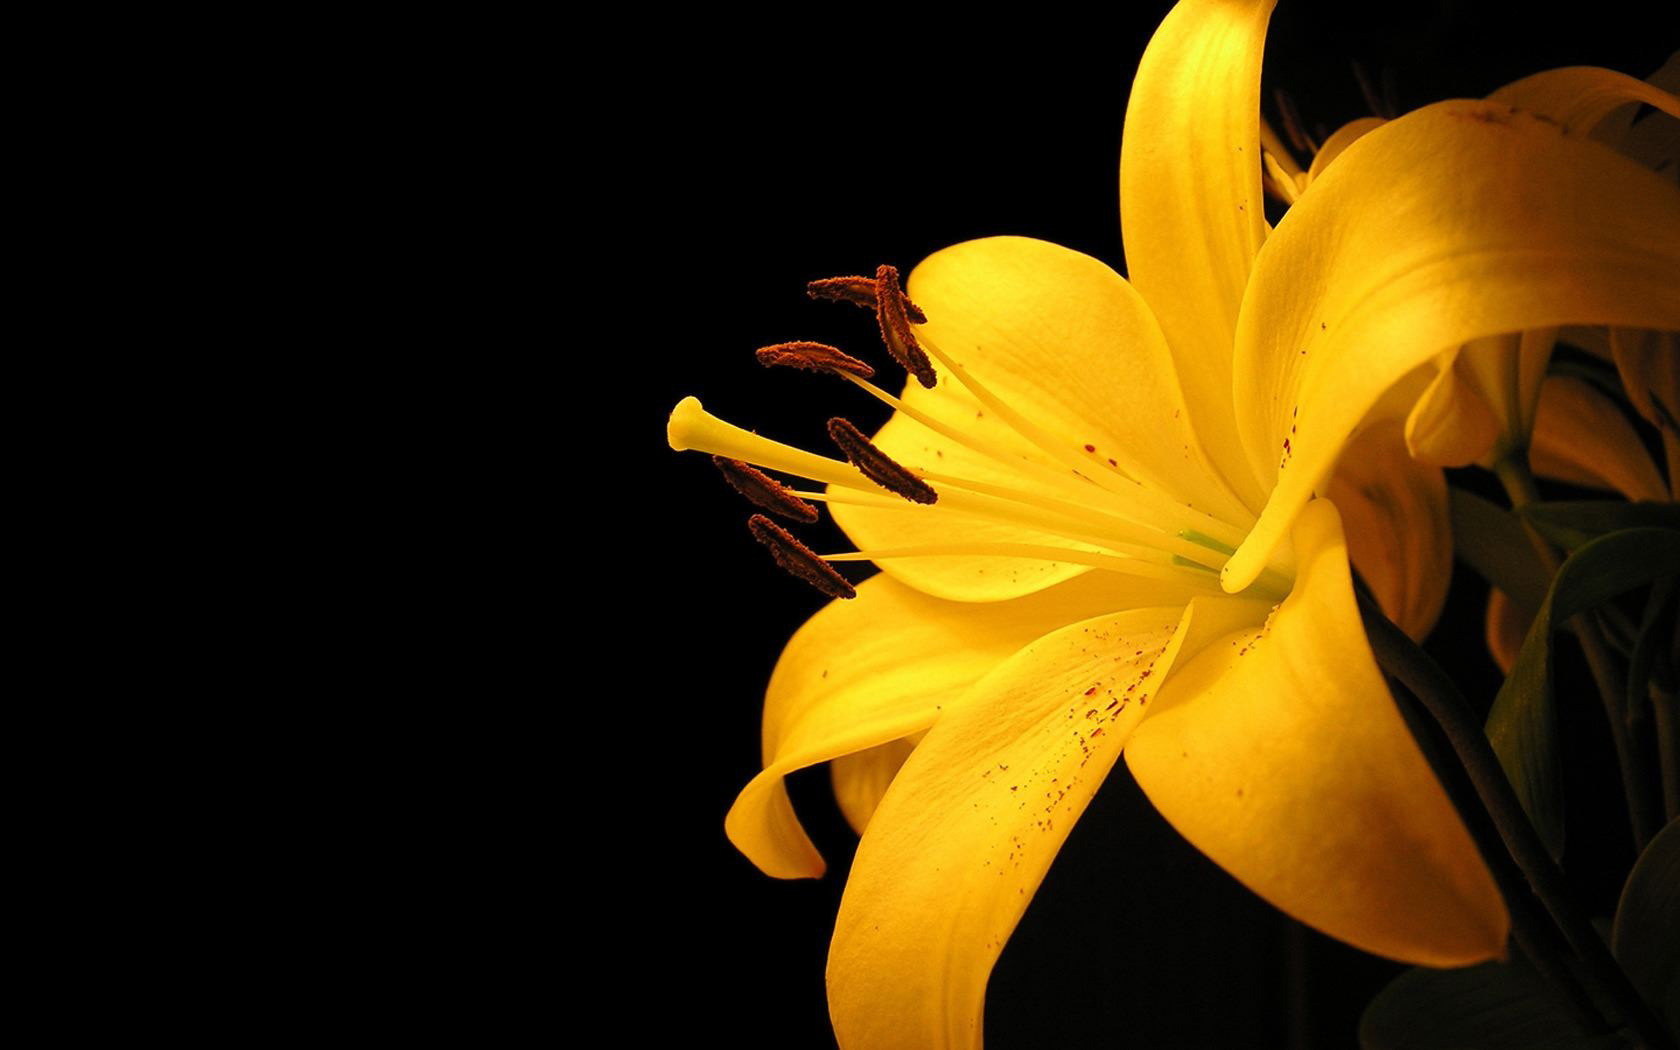 Black And Yellow Meaning Desktop Wallpaper